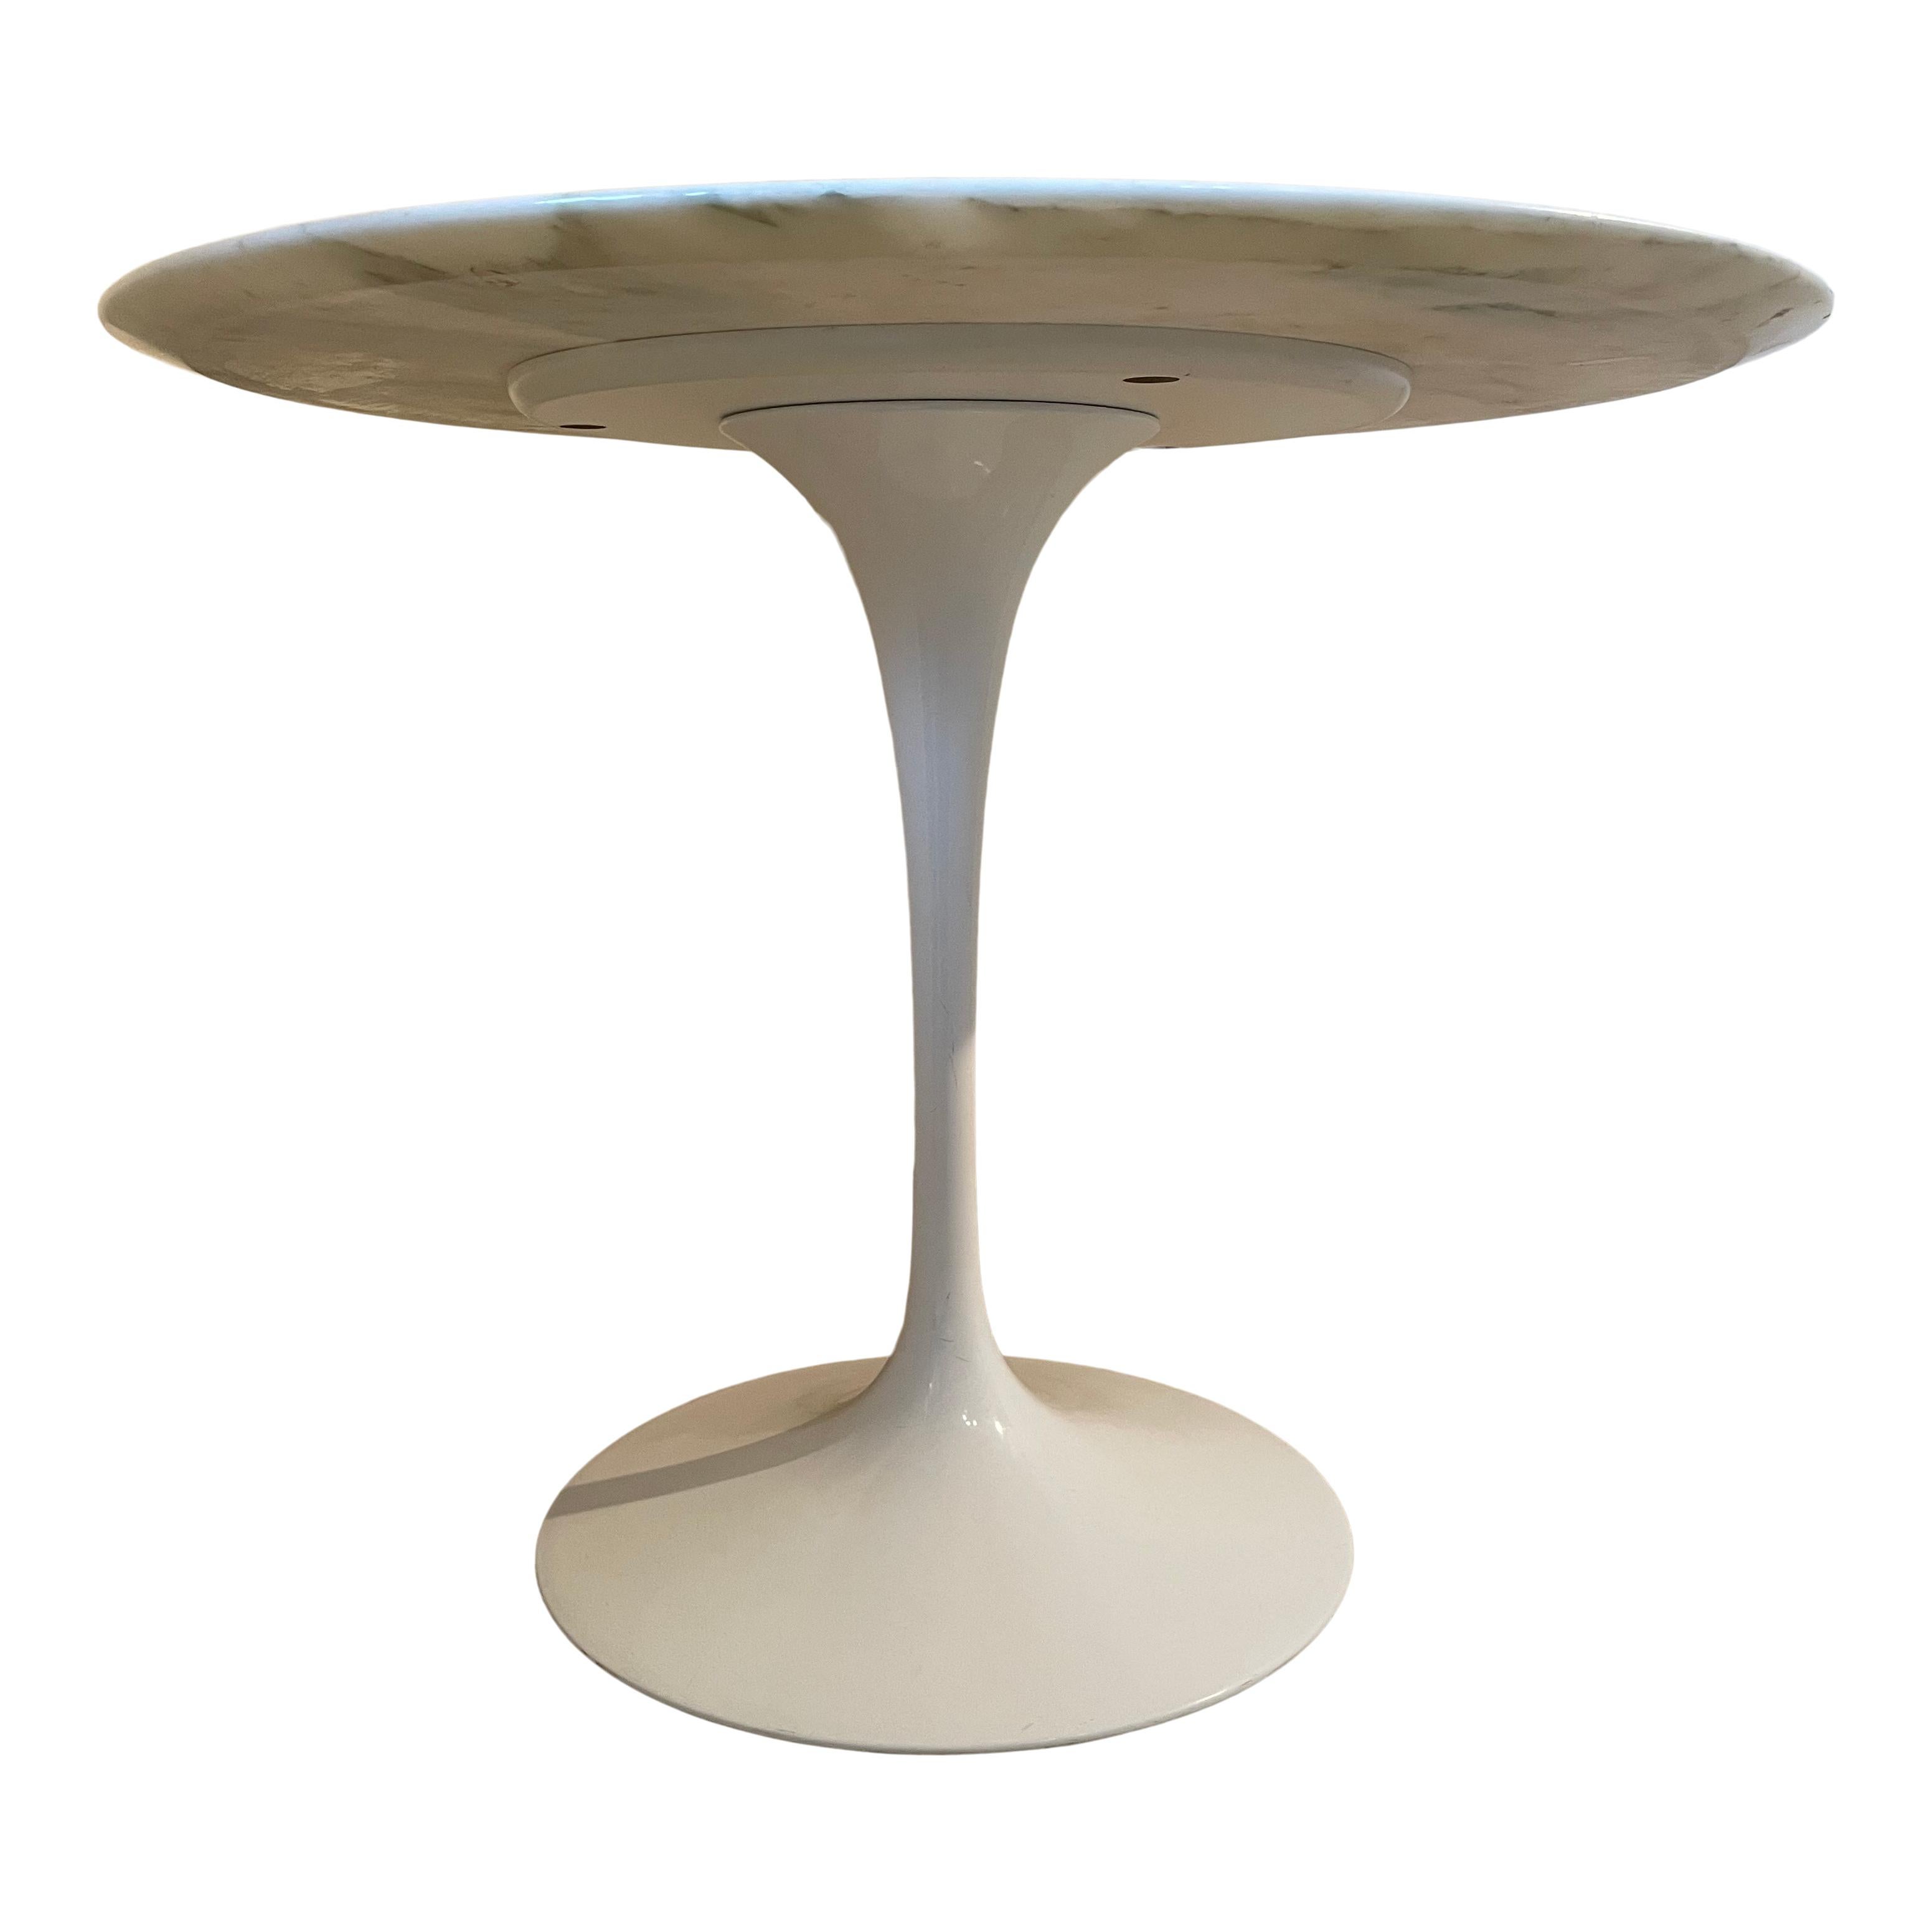 Lacquered Eero Saarinen Space Age White Carrara Marble Tulip Table for Knoll, 1967 For Sale